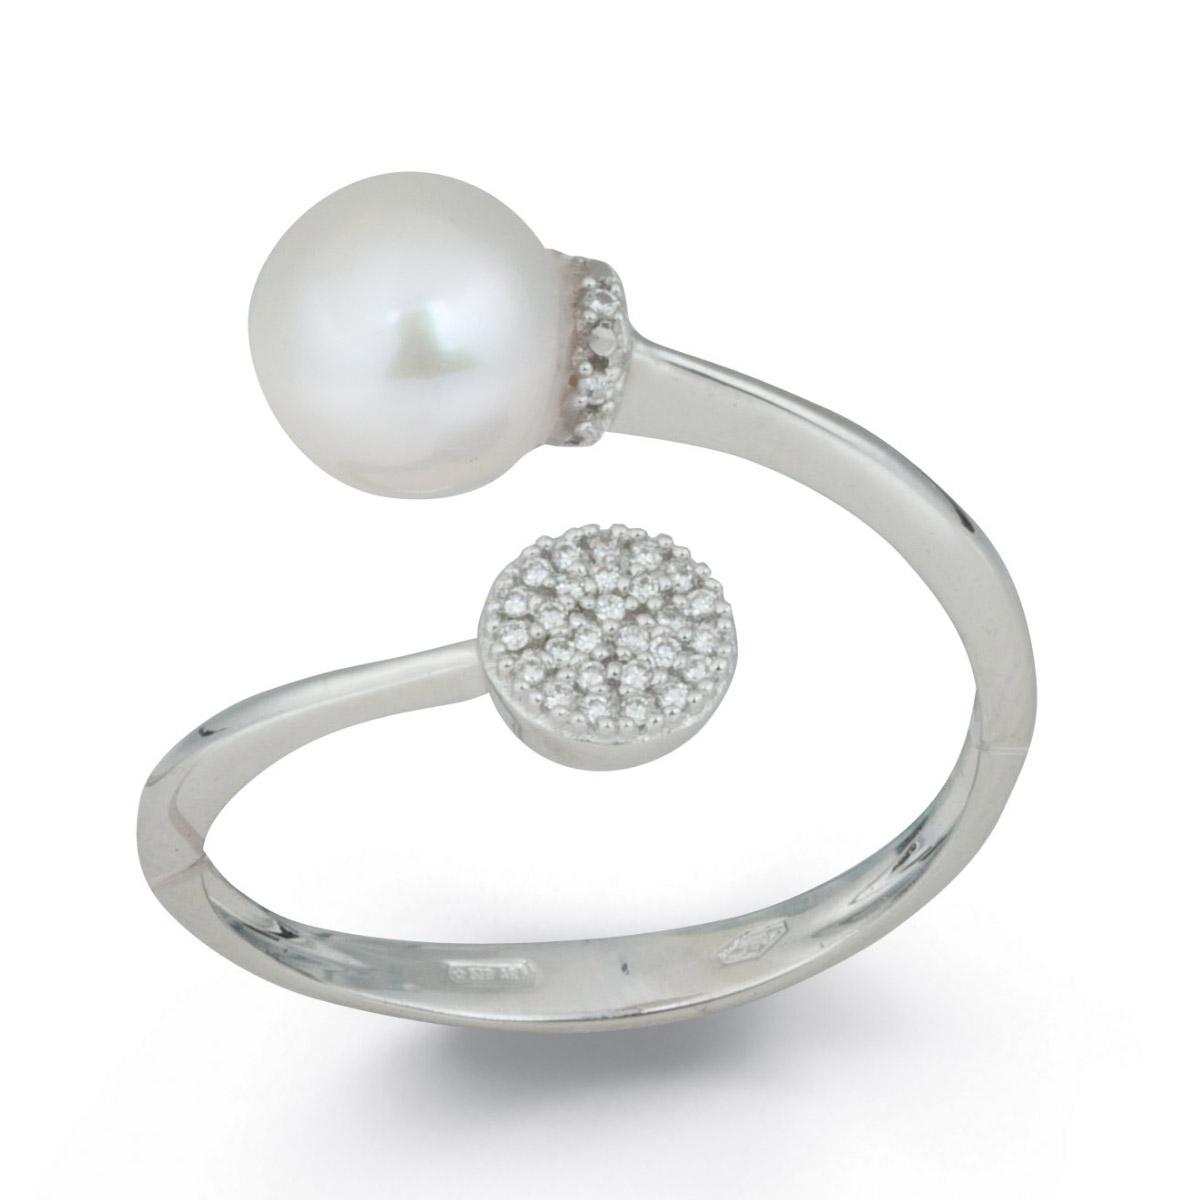 Contrariè ring in 18 kt white gold with diamond pavé circle and 7-7.50mm sea pearl - AD719-4B